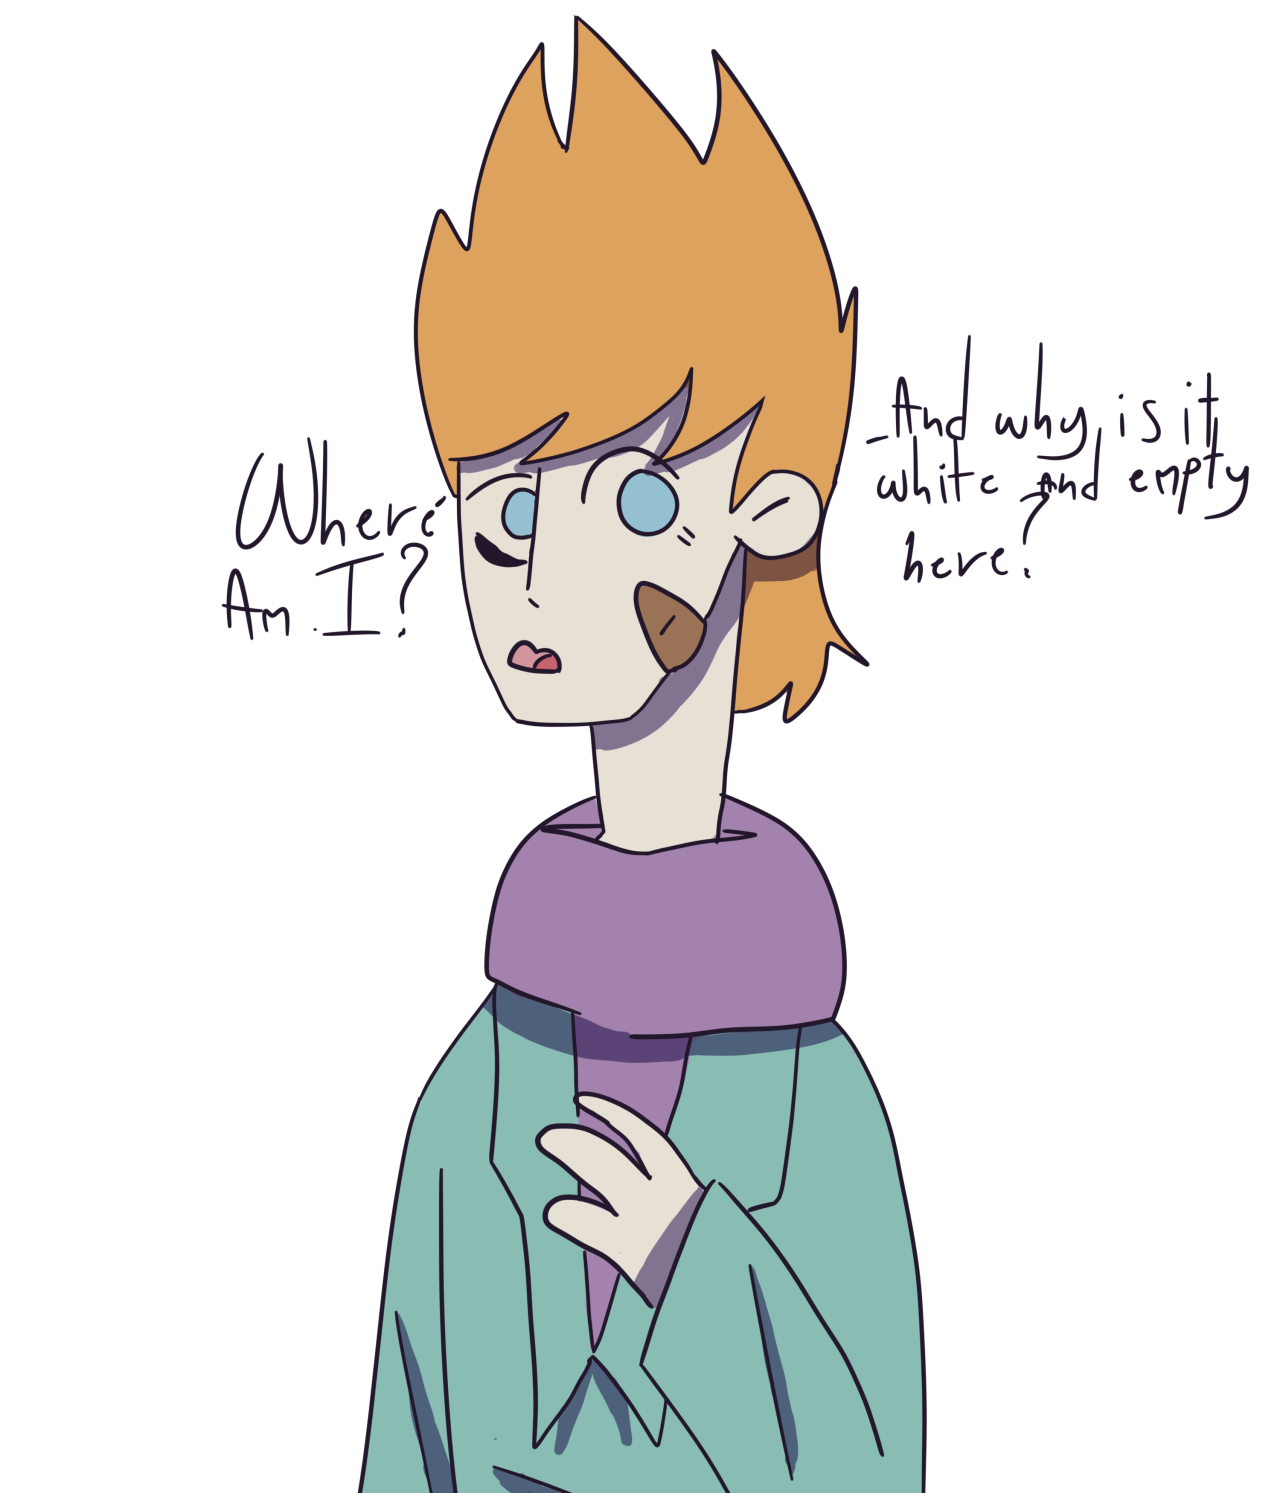 Lost Eddsworld on X: A faceless image of Matt, posted by Edd to